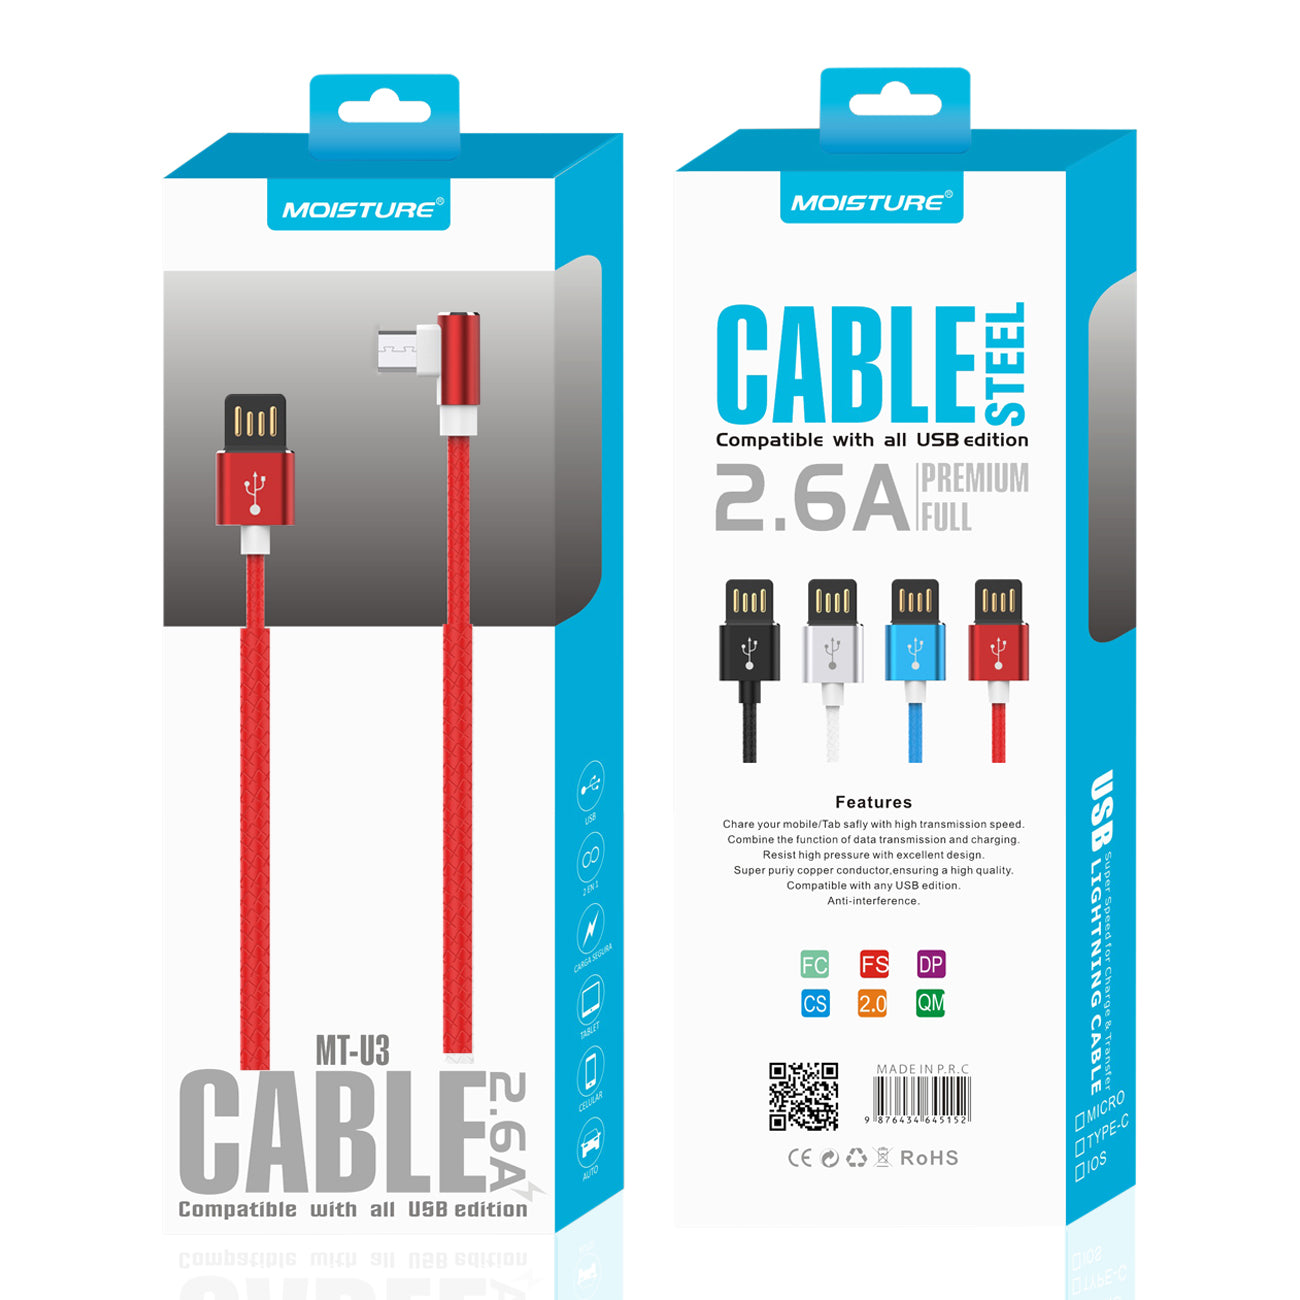 Cable Micro USB Premium Full Steel Moisture 2.6A Red Color